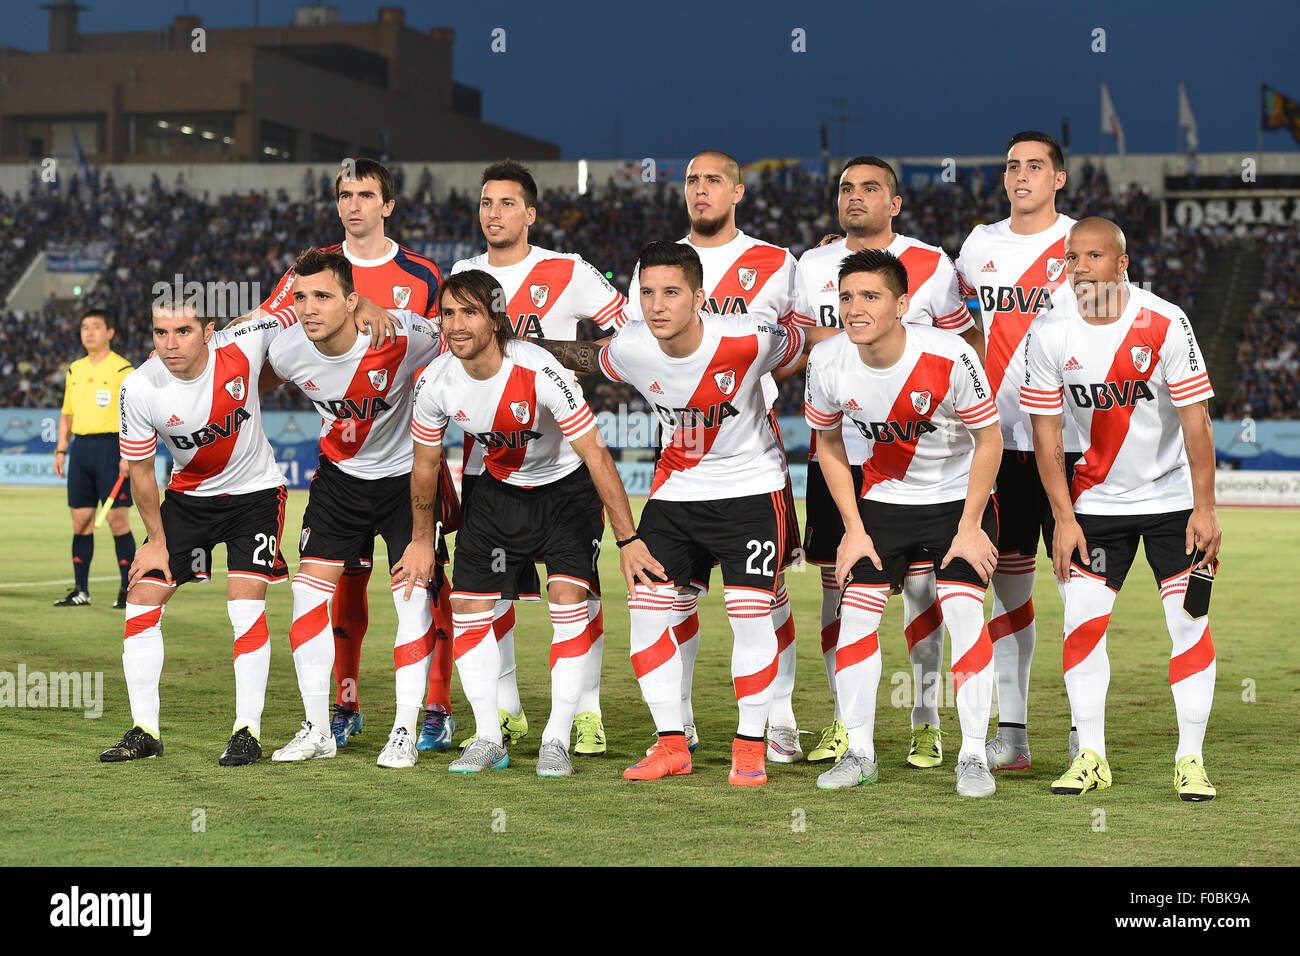 River Plate team group Line-up (River),  August 11, 2015 - Football / Soccer :  SURUGA bank Championship 2015 match between Gamba Osaka 0-3 River Plate  at Expo '70 Commemorative Stadium in Osaka, Japan.  (Photo by AFLO SPORT) Stock Photo